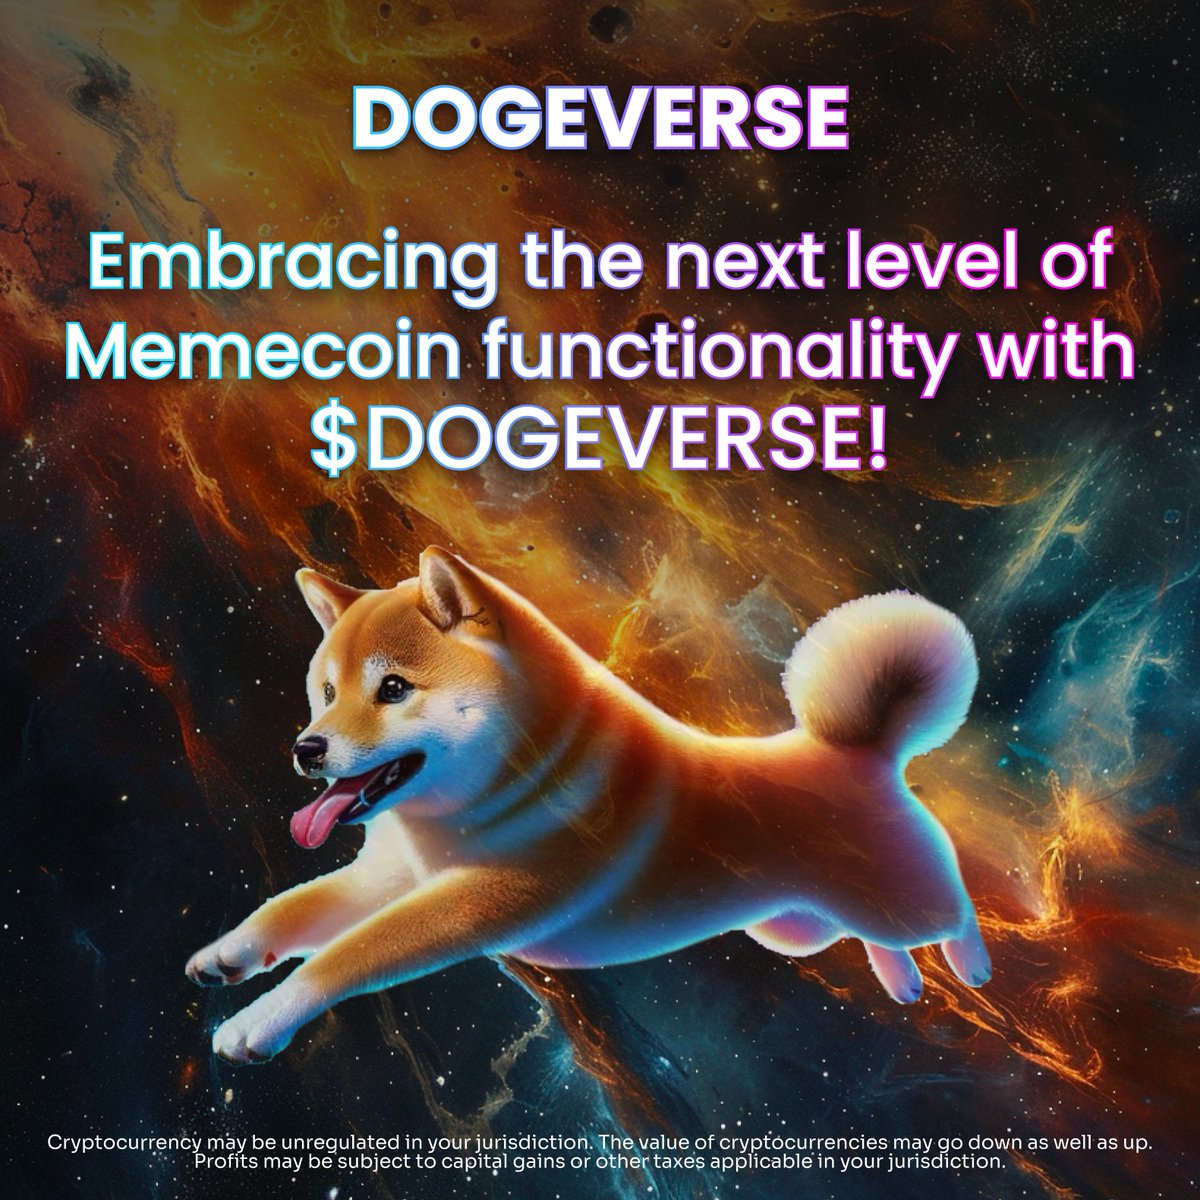 Explore the $DOGEVERSE Benefits on #Ethereum:

1️⃣ Enhanced Security: Leverage ETH's network for safe transactions. 🔒

2️⃣ Easy Compatibility: Seamlessly use #Tokens across wallets and exchanges. 🌐

Embracing the next level of #Memecoin functionality with #DOGEVERSE! 🚀🐶